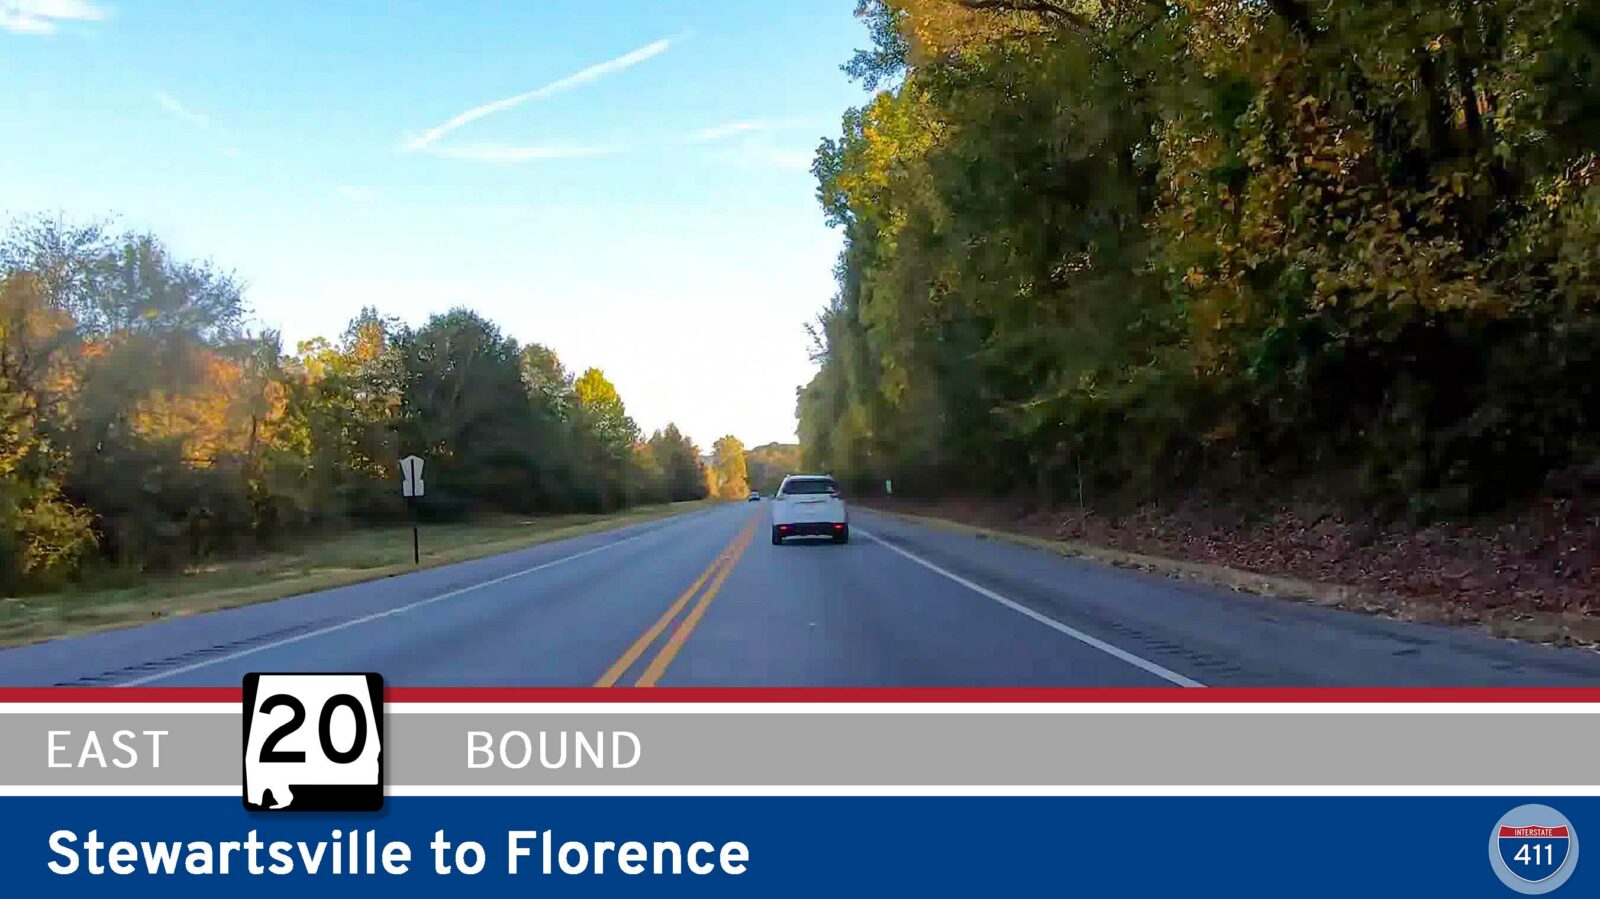 Drive America's Highways for 14 miles east along Alabama State Route 20 from Stewartsville to Florence.